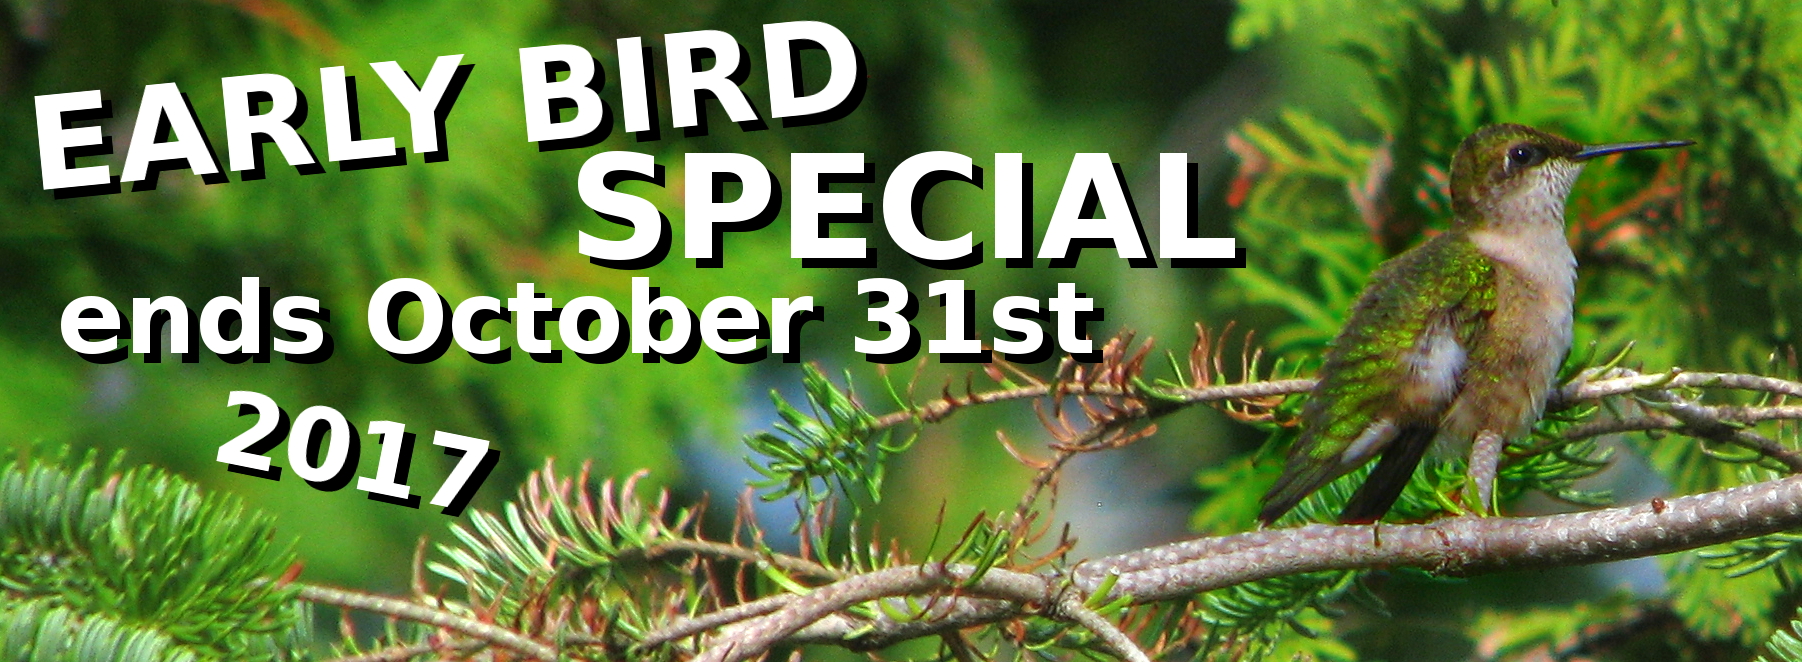 Early Bird Special Ends October 31st, 2017